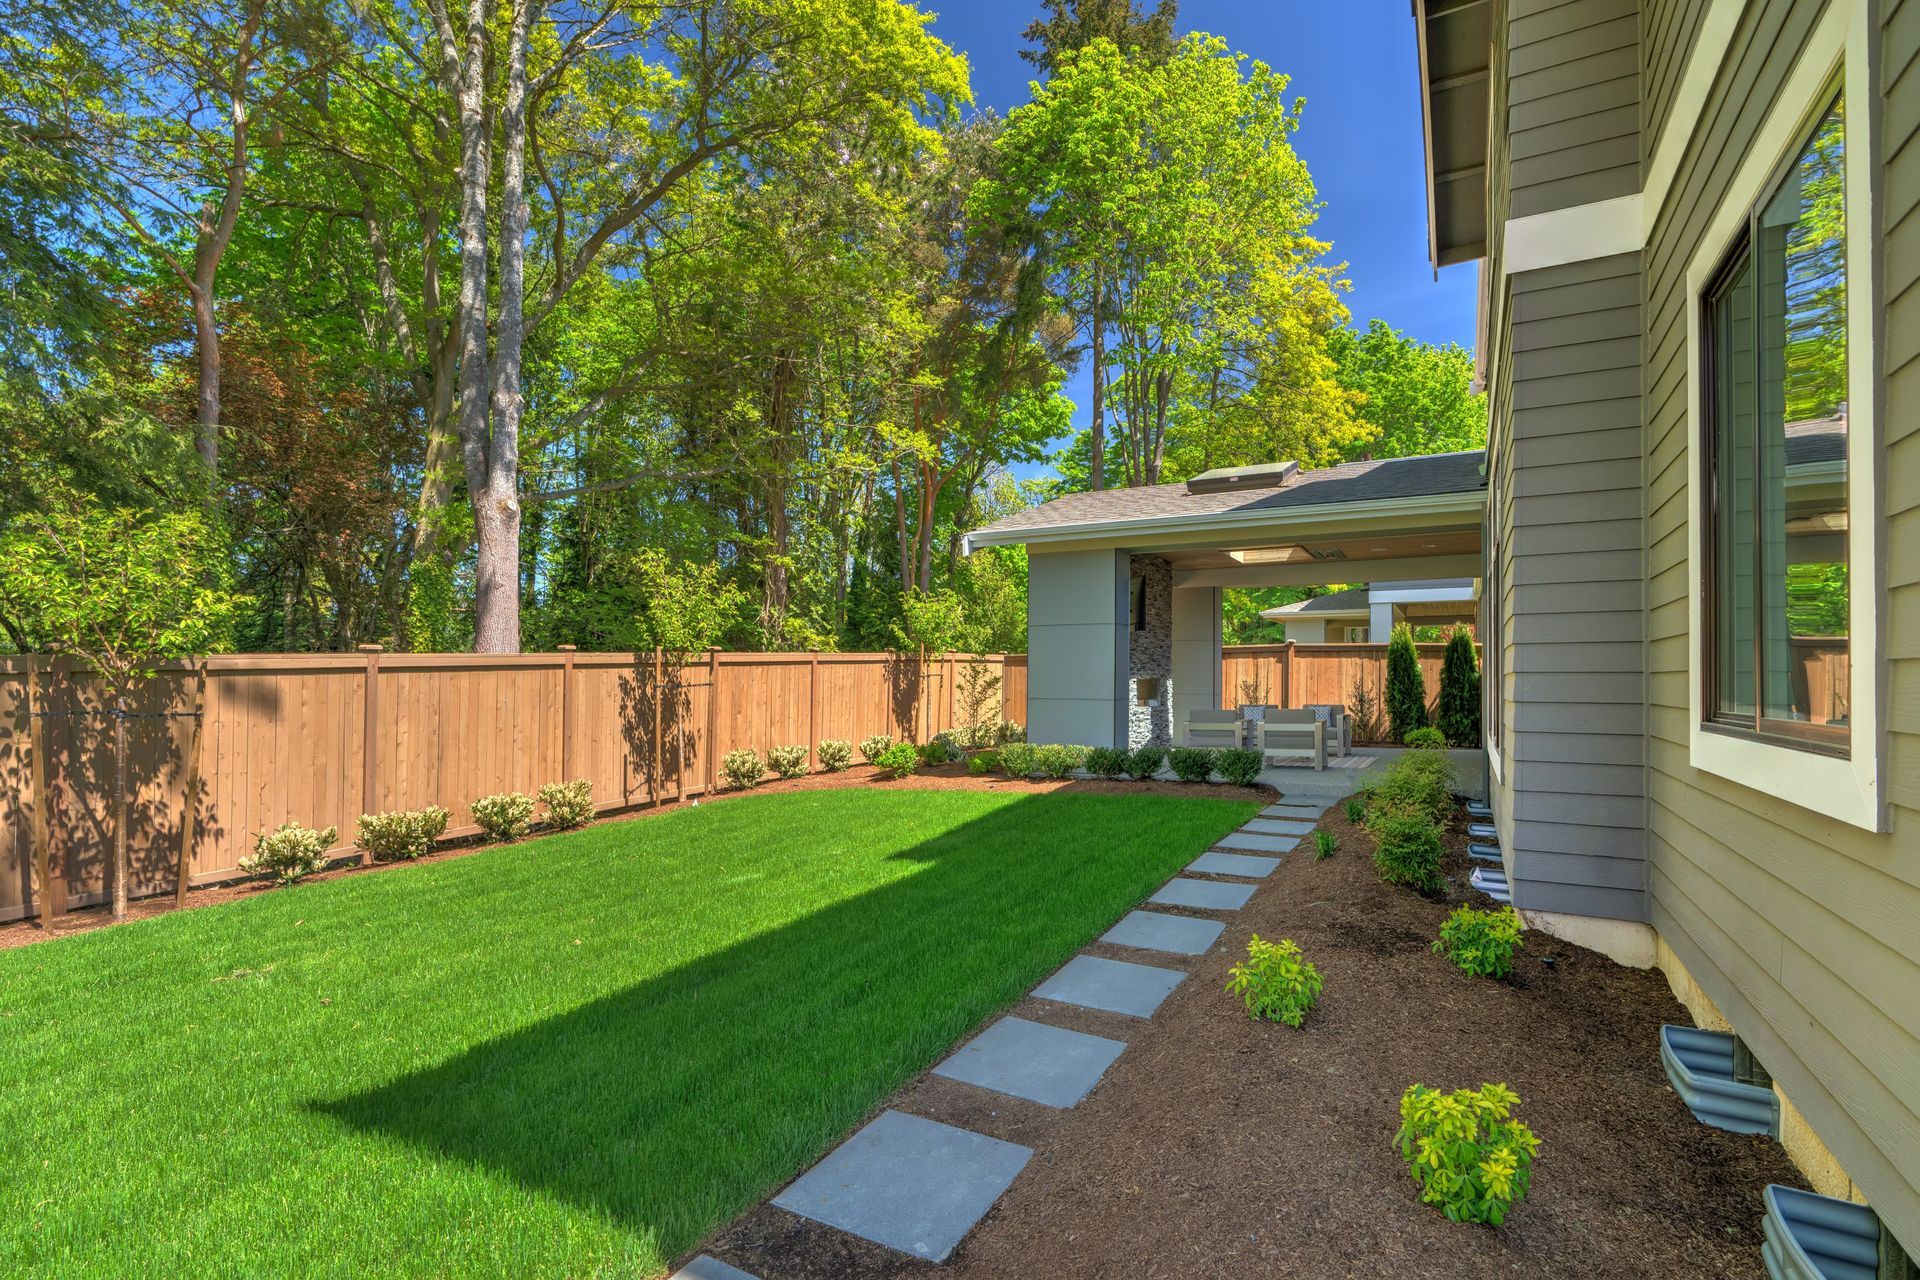 a house with a wooden fence and a lush green lawn